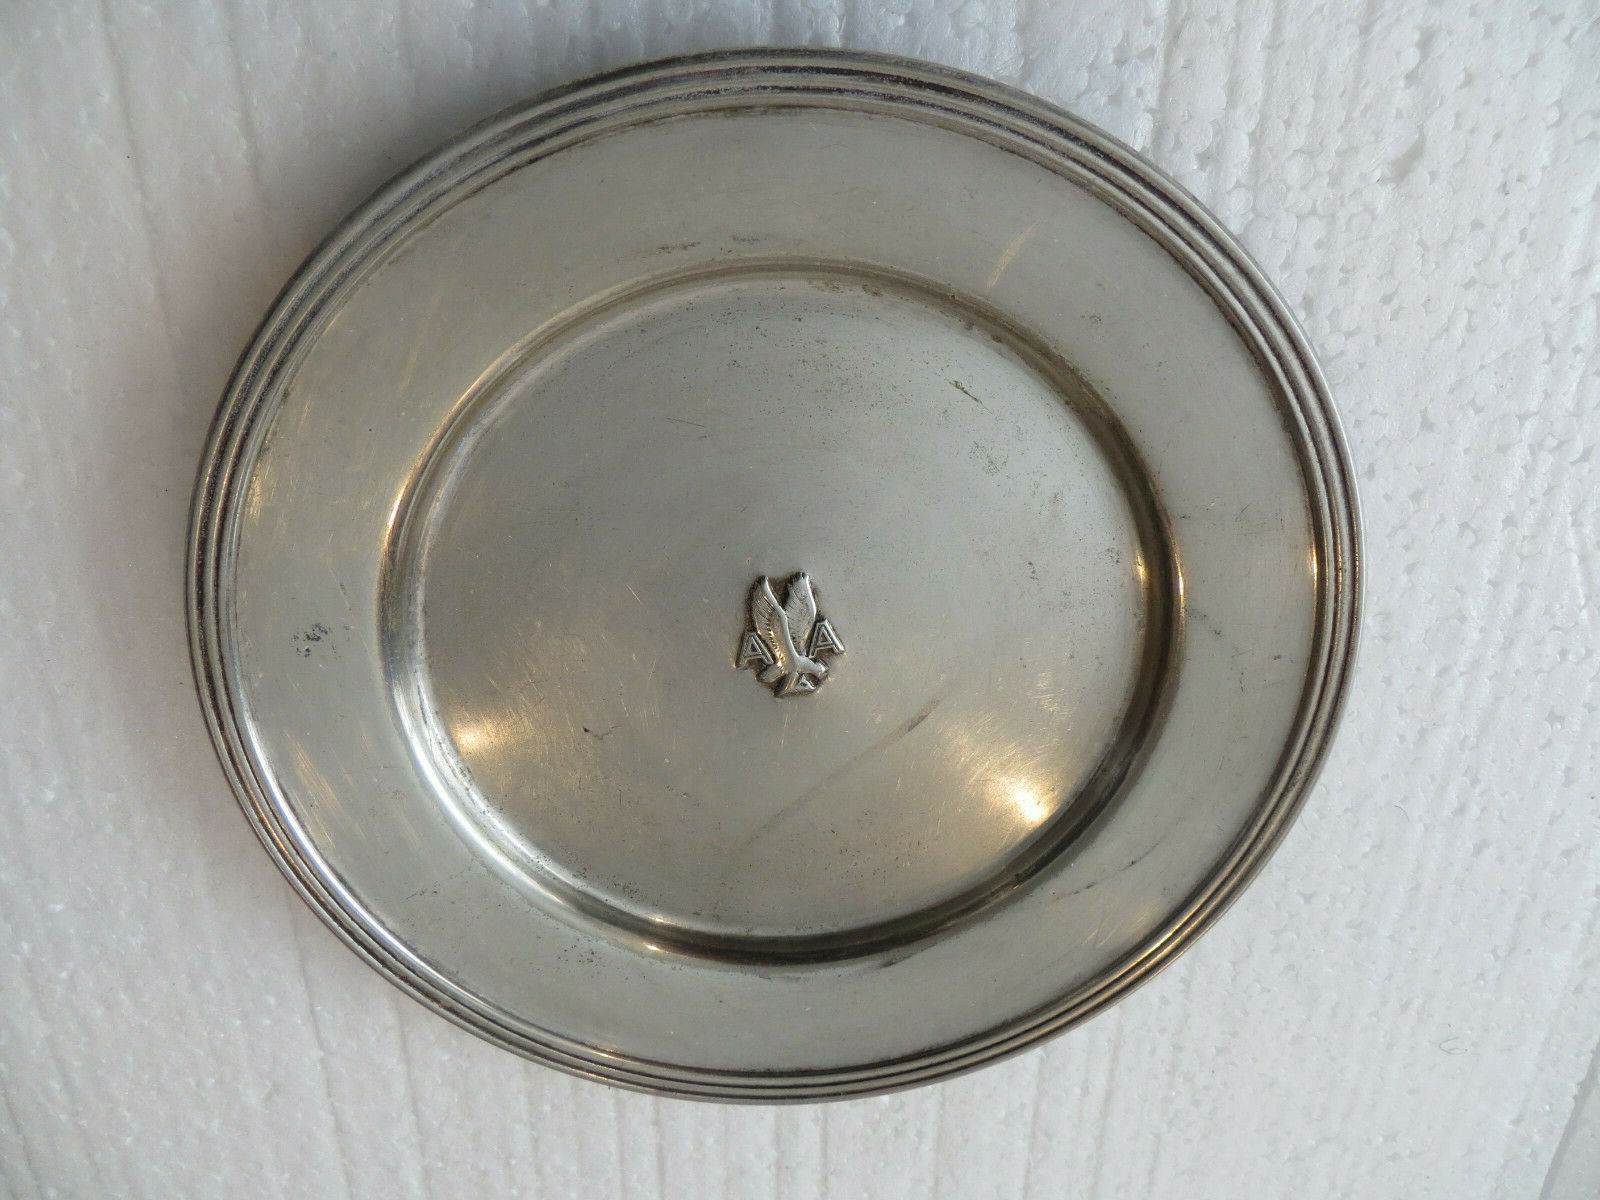 TWO (2) AMERICAN AIRLINES SILVER DISH